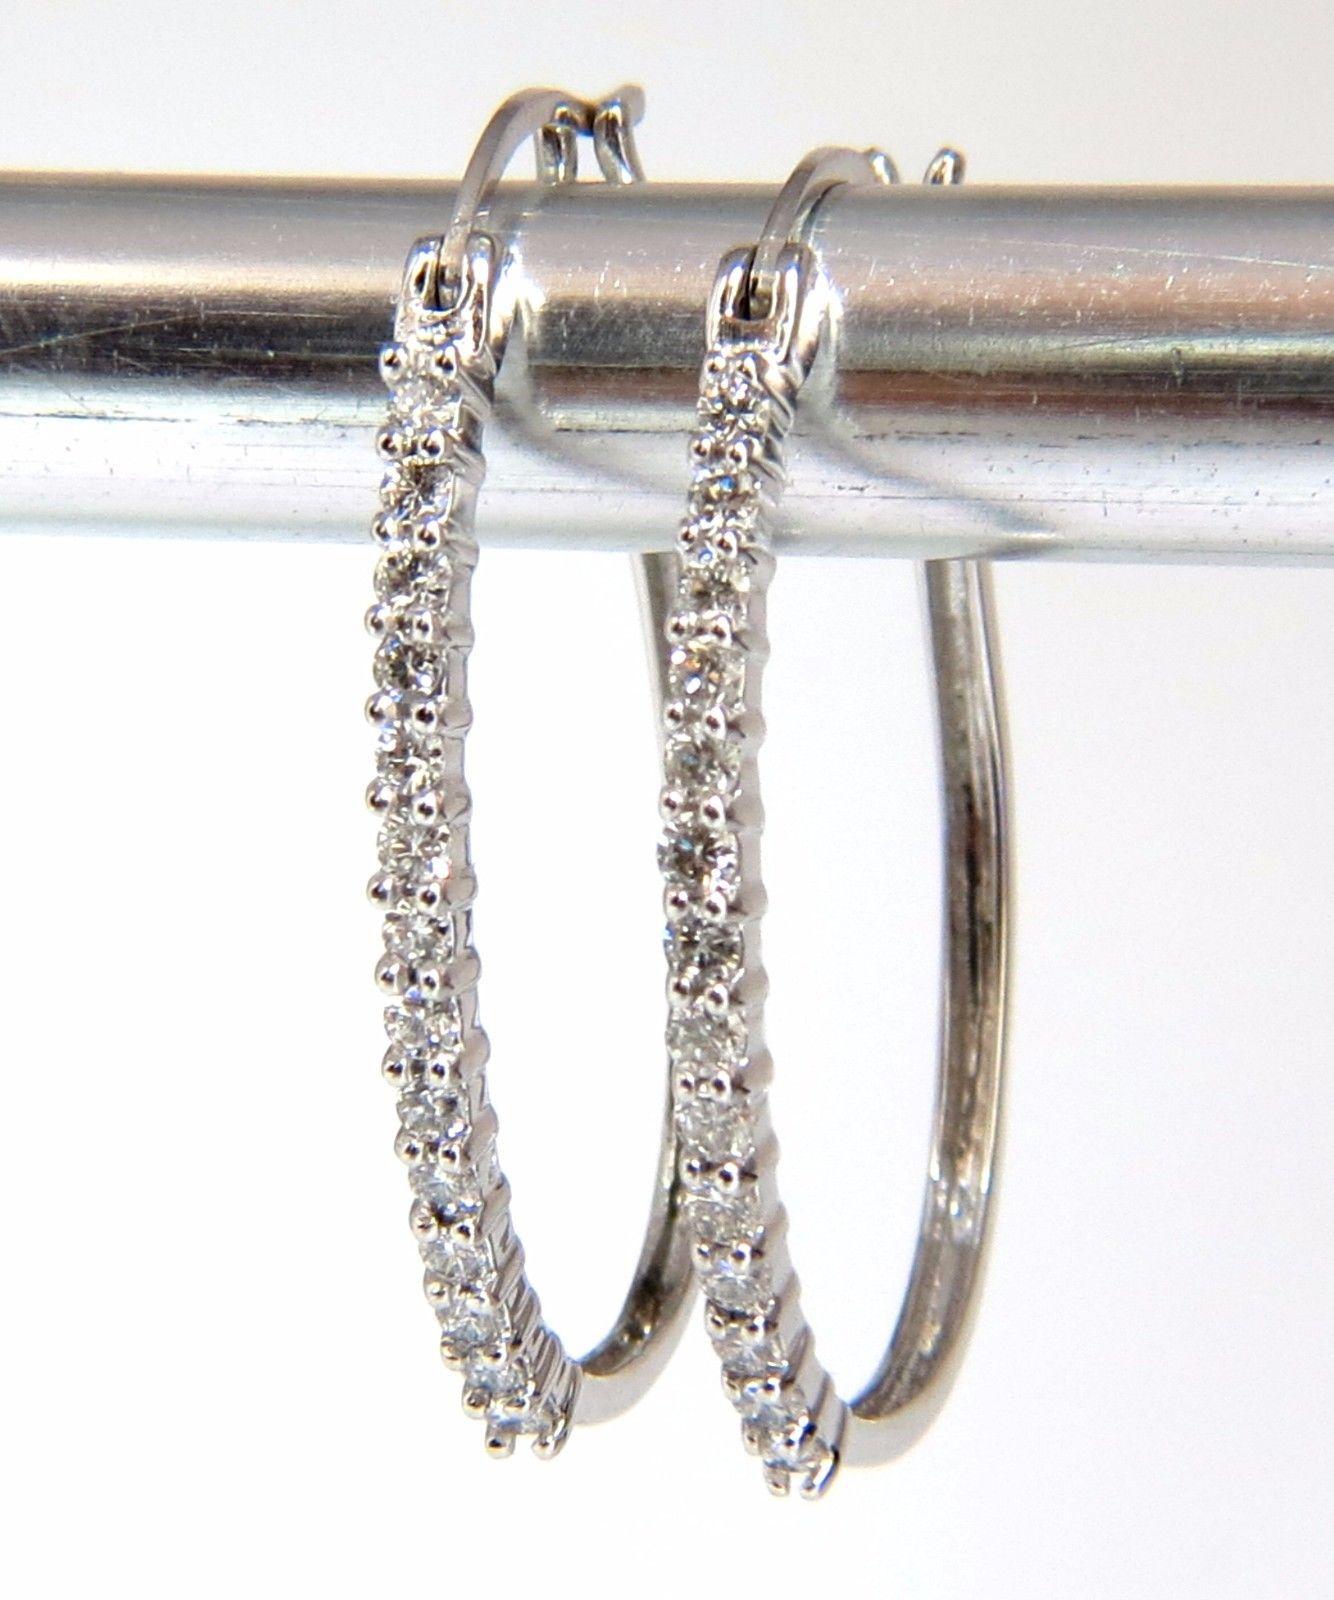 Elongated Hoop

.80ct. Natural diamonds  

Rounds, Full cut brilliants.

G- color Vs-2 Clarity. 

Secure lever backs

Excellent detail.

14kt. white gold

3.7 grams.

1.2 x .94 Inch.